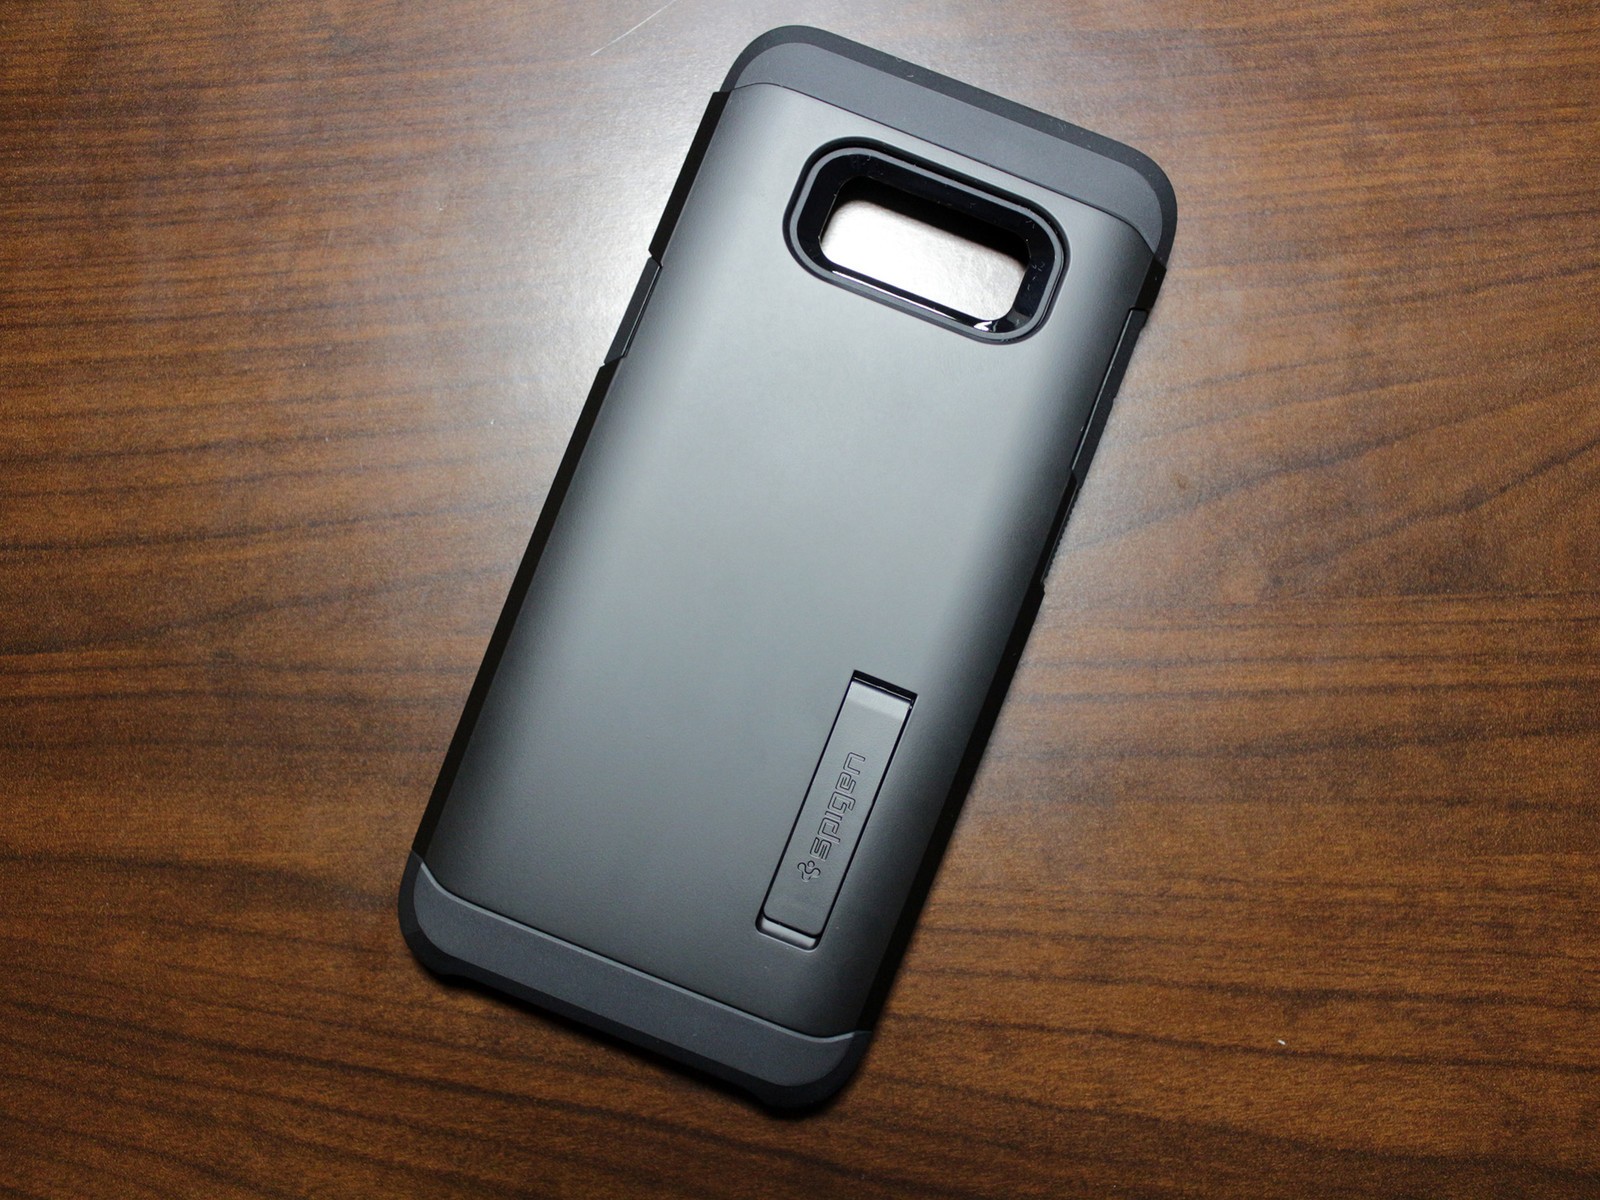 Spigen prepared a new line of cases specifically for Samsung S8 and S8 Plus